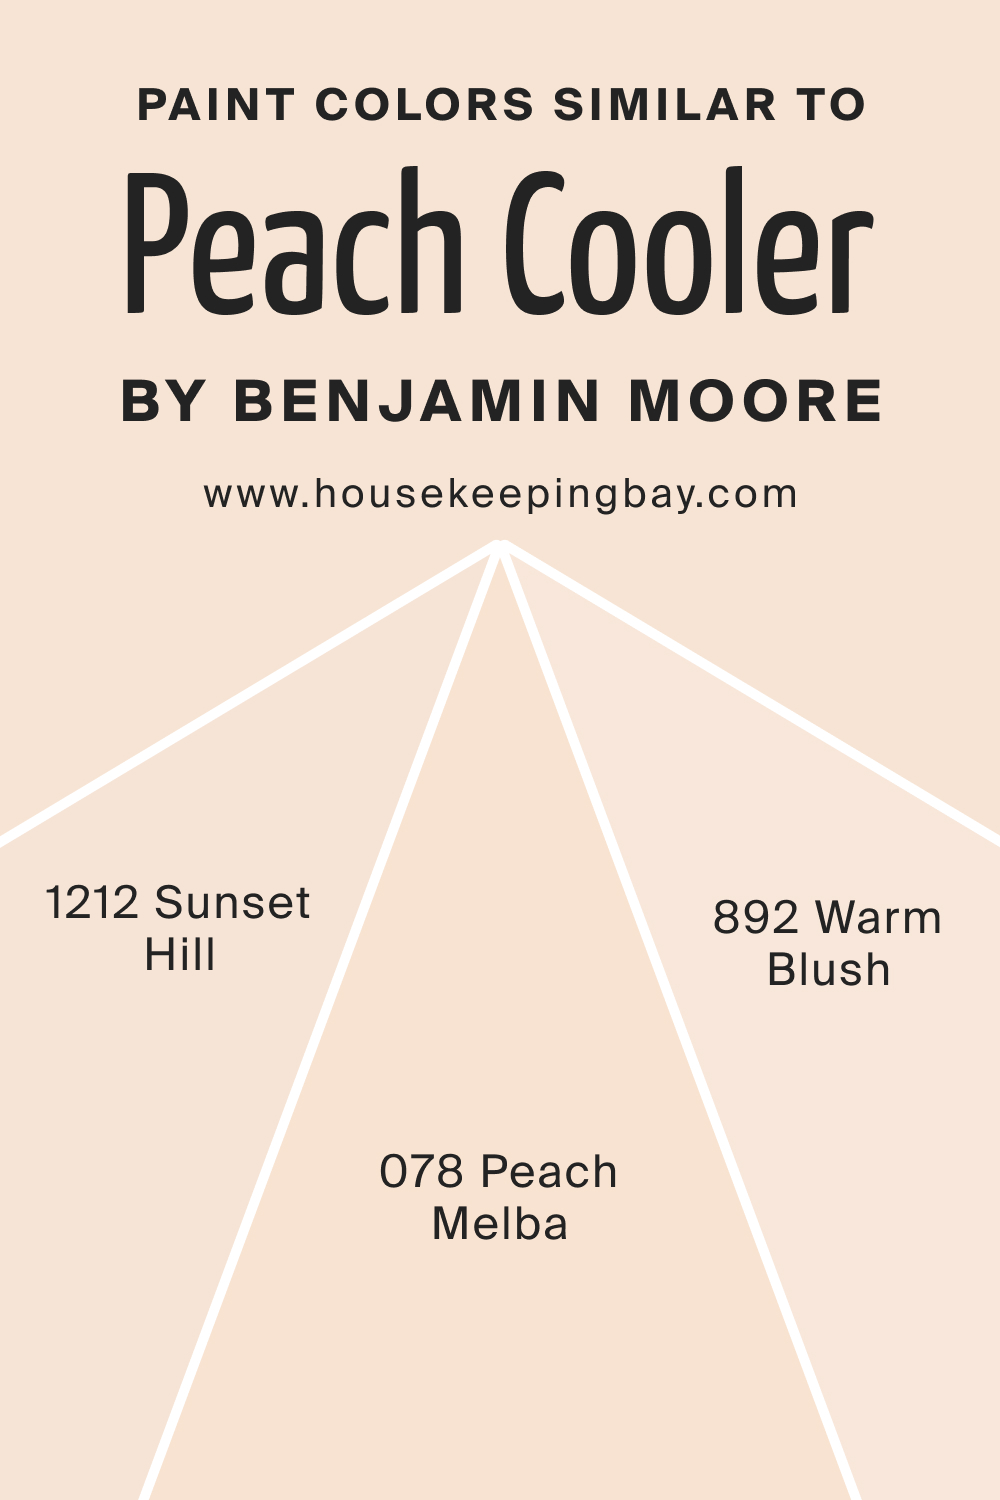 Paint Colors Similar to Peach Cooler 022 by Benjamin Moore